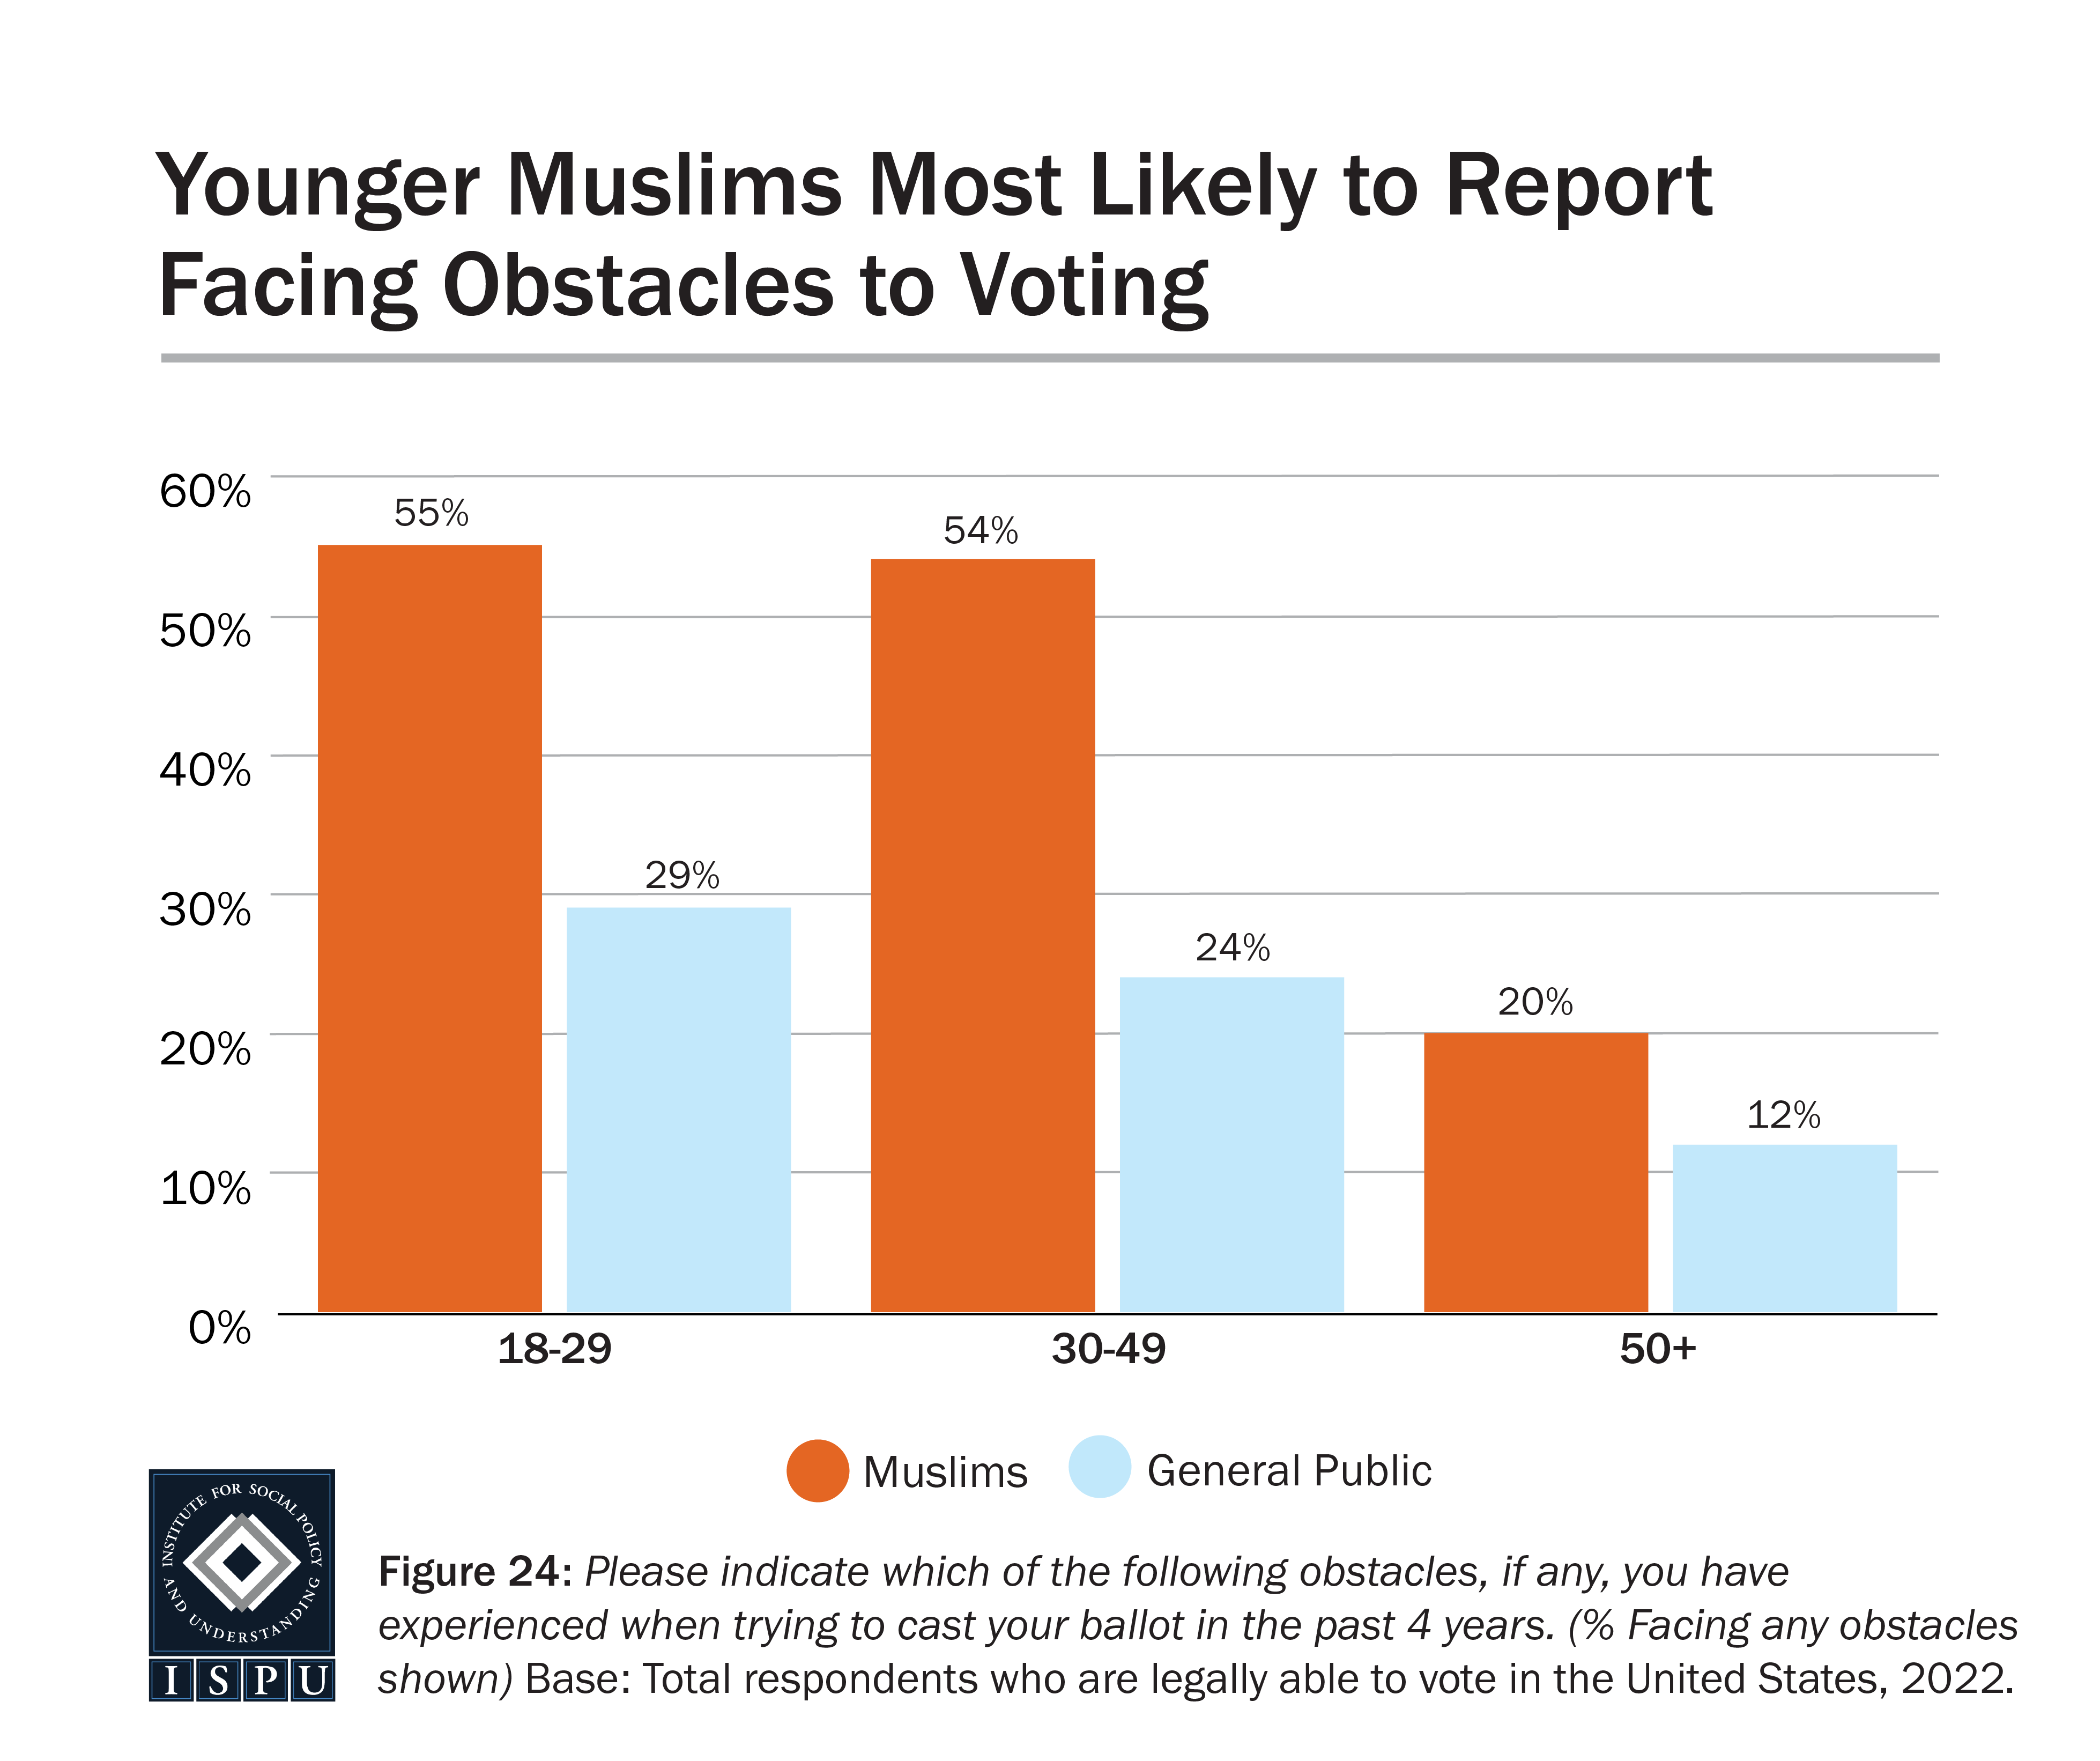 A bar graph showing the proportion fo Muslims in various age groups who reported facing obstacles to voting during the past 4 years.